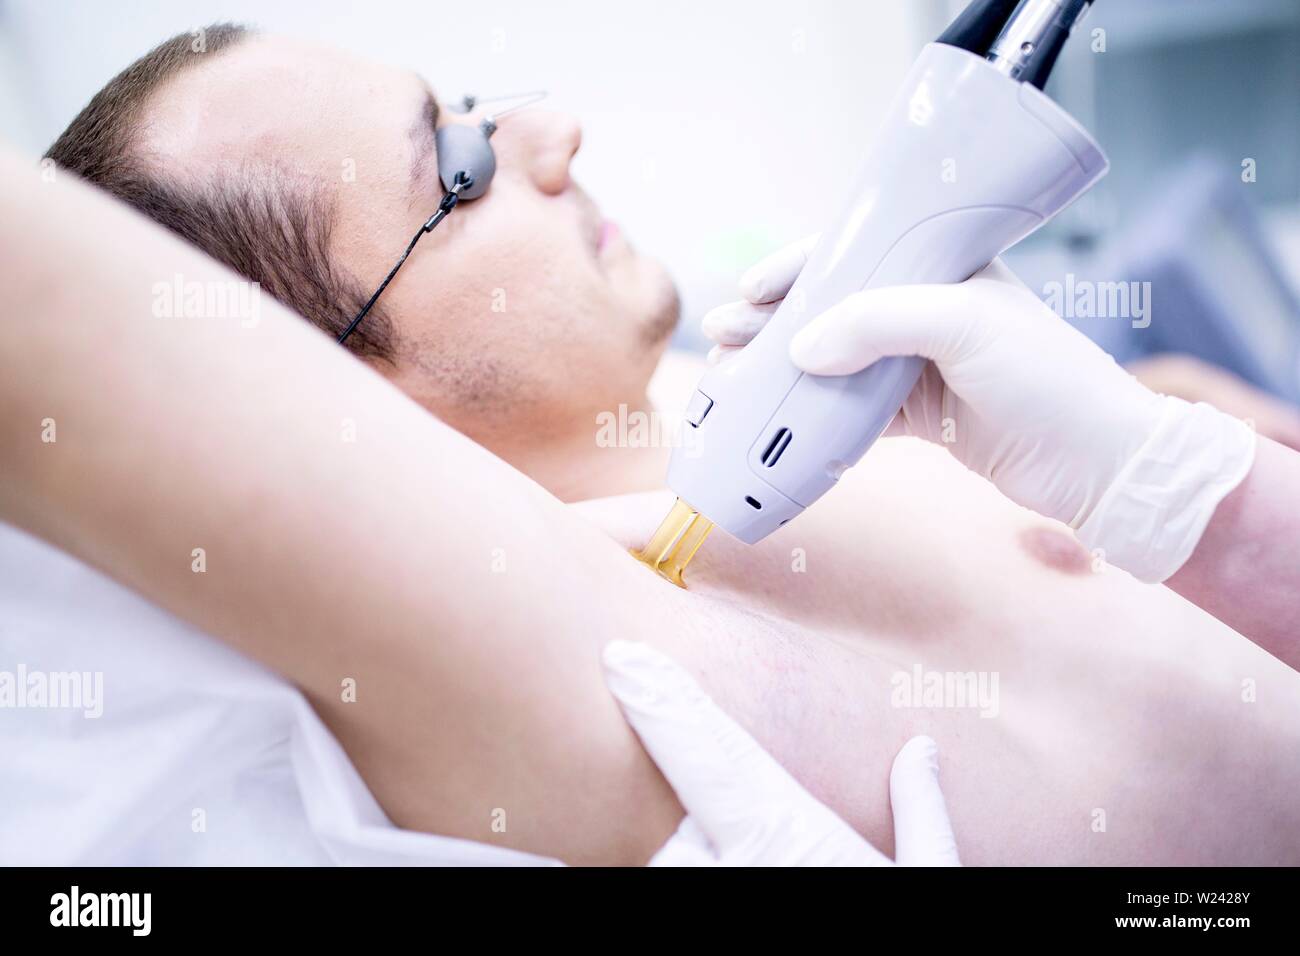 Man getting laser hair removal treatment for under arms. Stock Photo